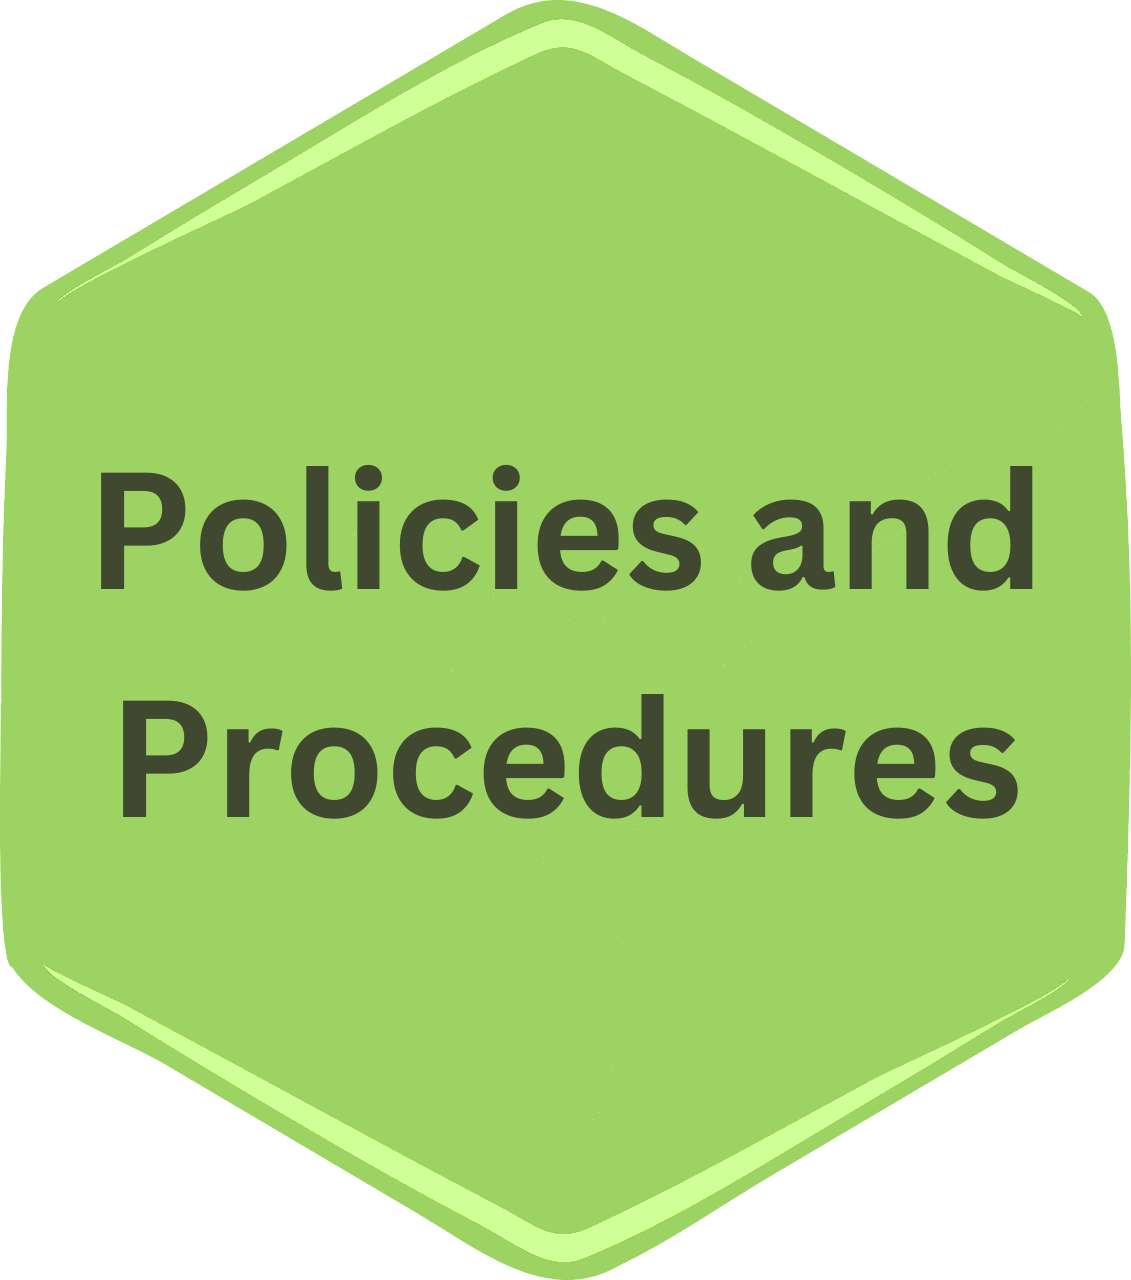 policies button to view all policies and procedures